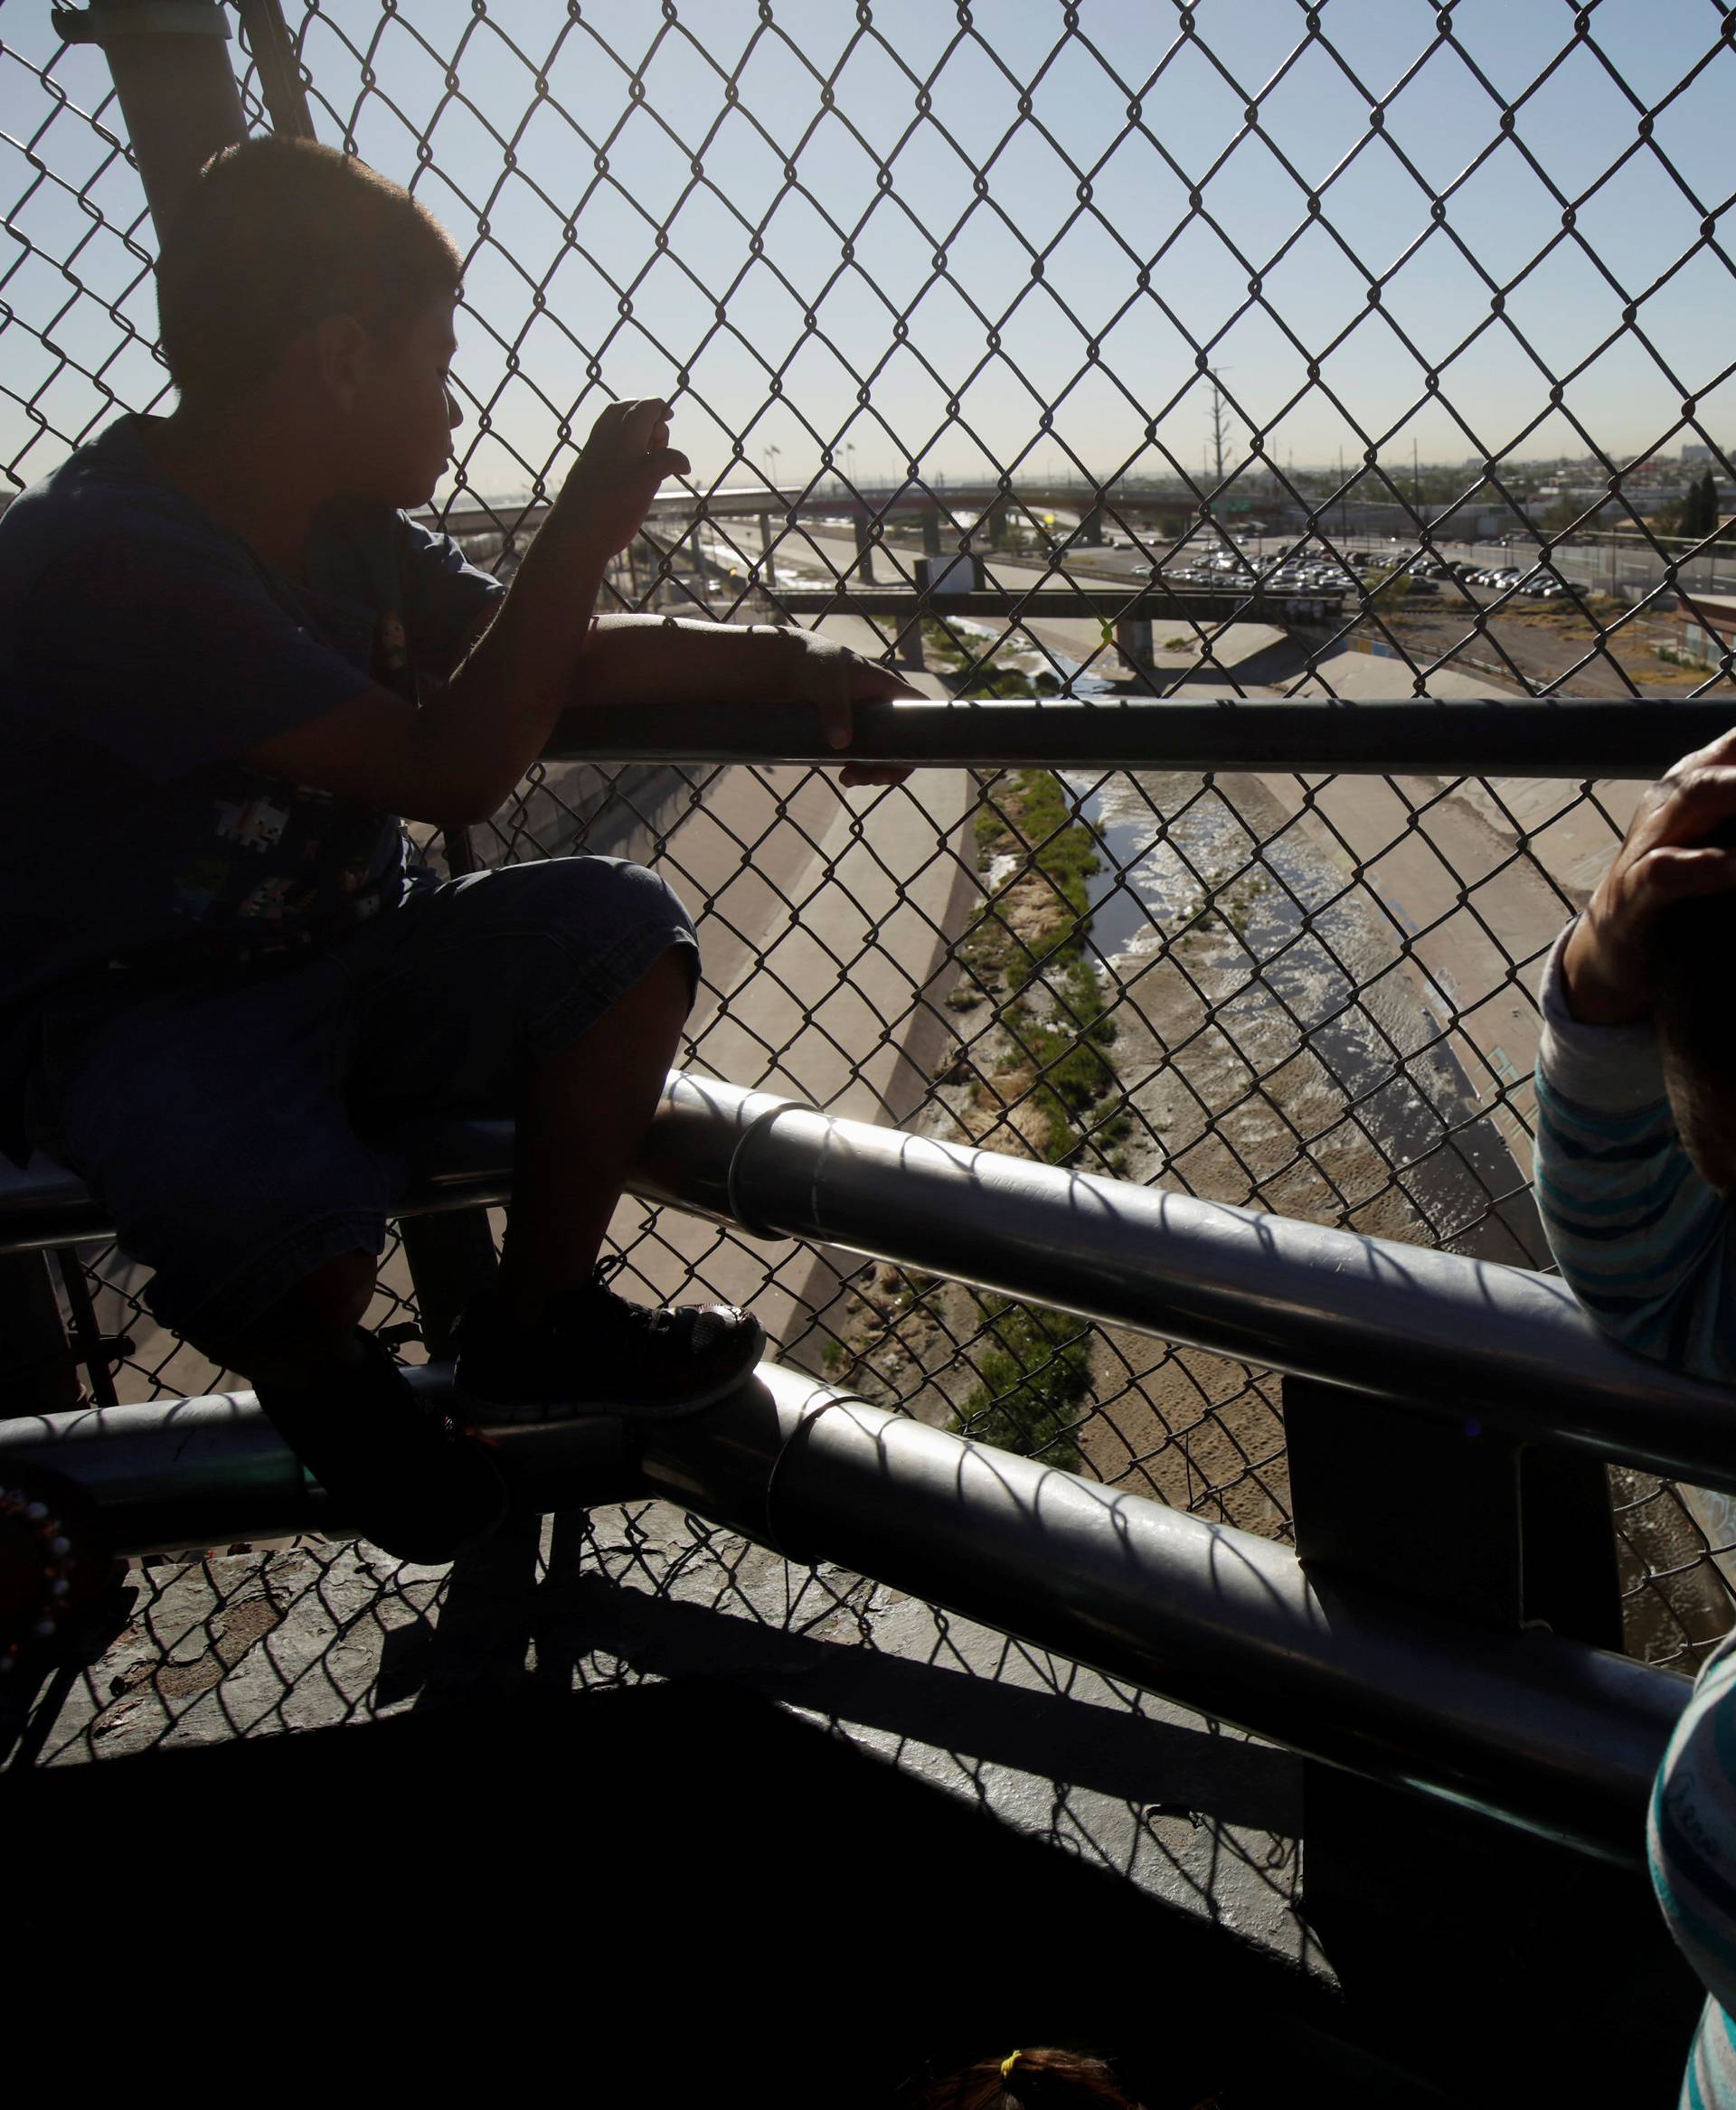 A migrant family from Mexico, fleeing from violence, wait to enter the United States to apply for asylum at Paso del Norte international border crossing bridge in Ciudad Juarez